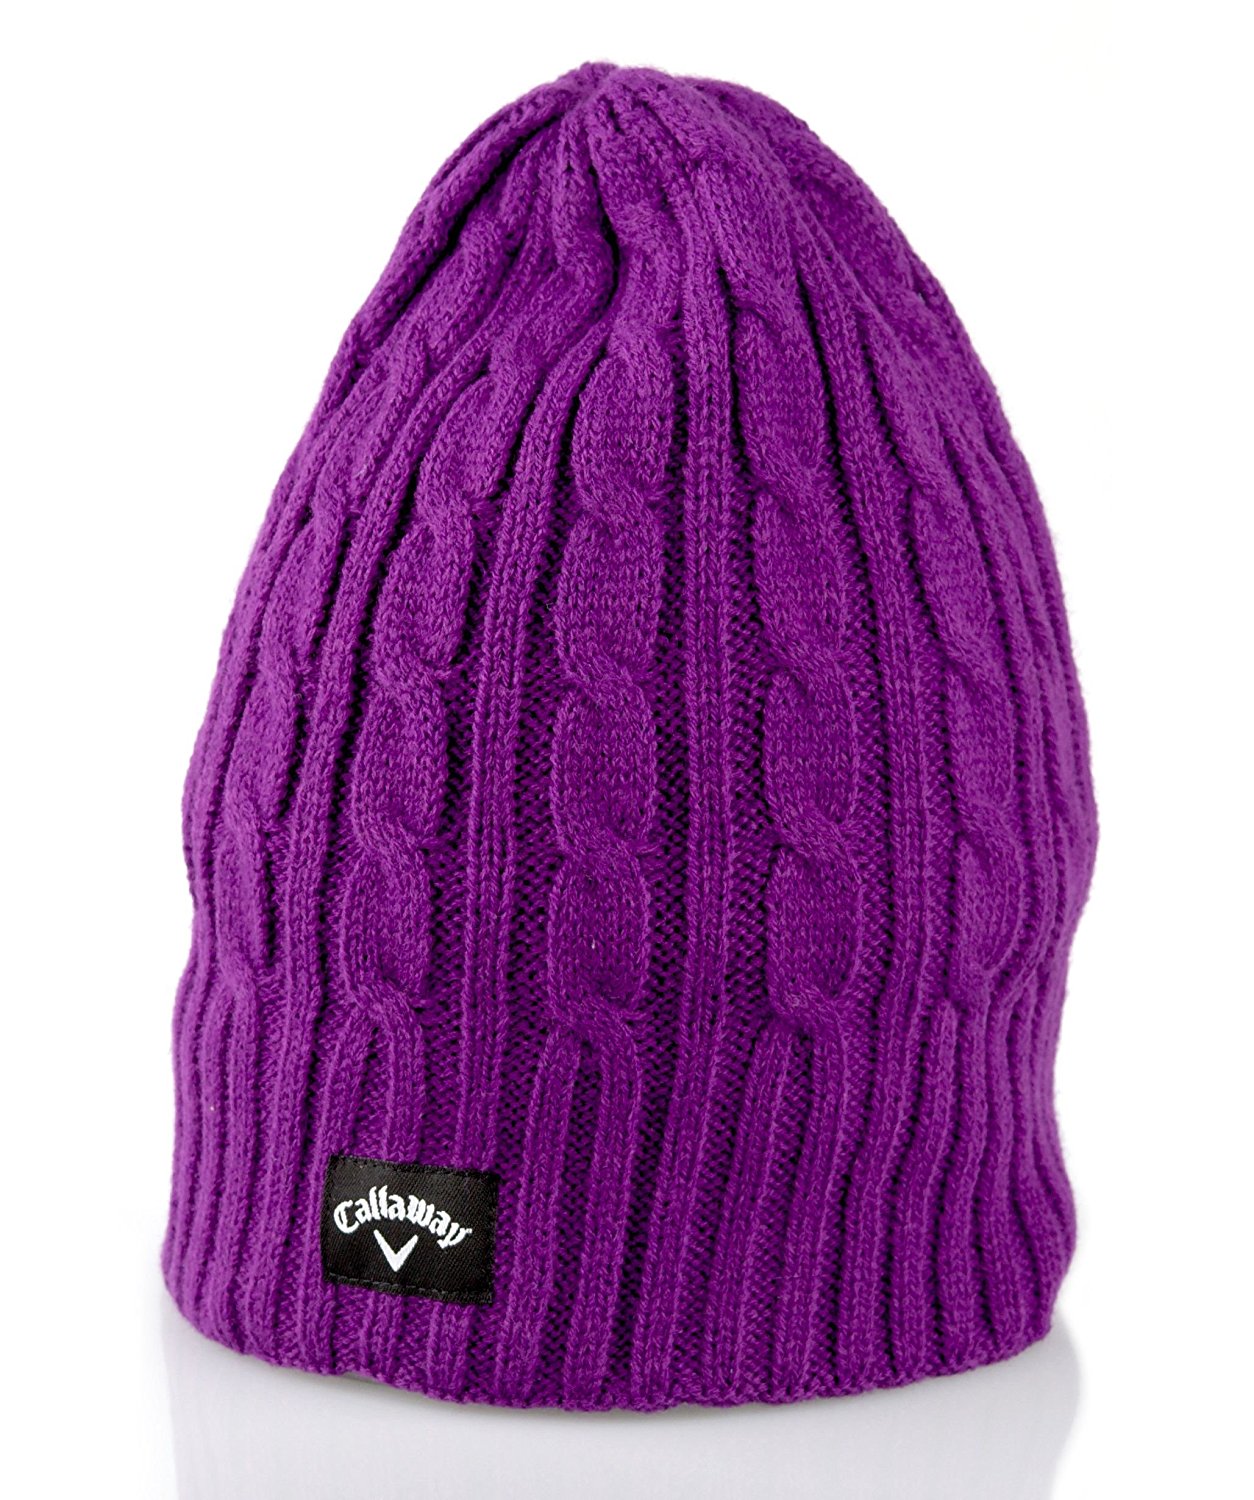 Womens Callaway Cable Knit Winter Thermal Golf Beanie Hats